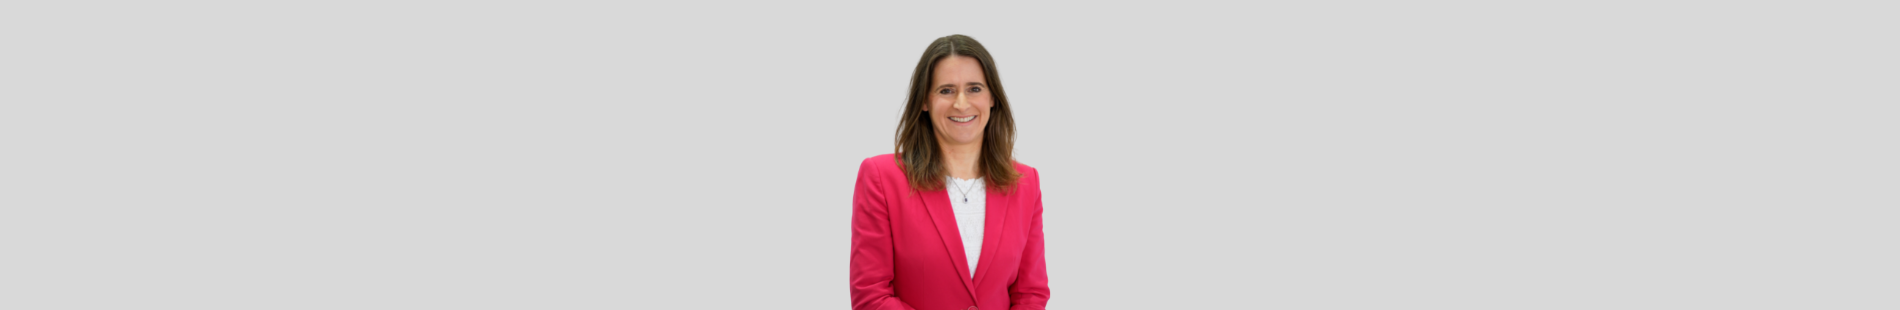 Ocuco Appoints Clodagh Nic Canna as Chief Product Officer